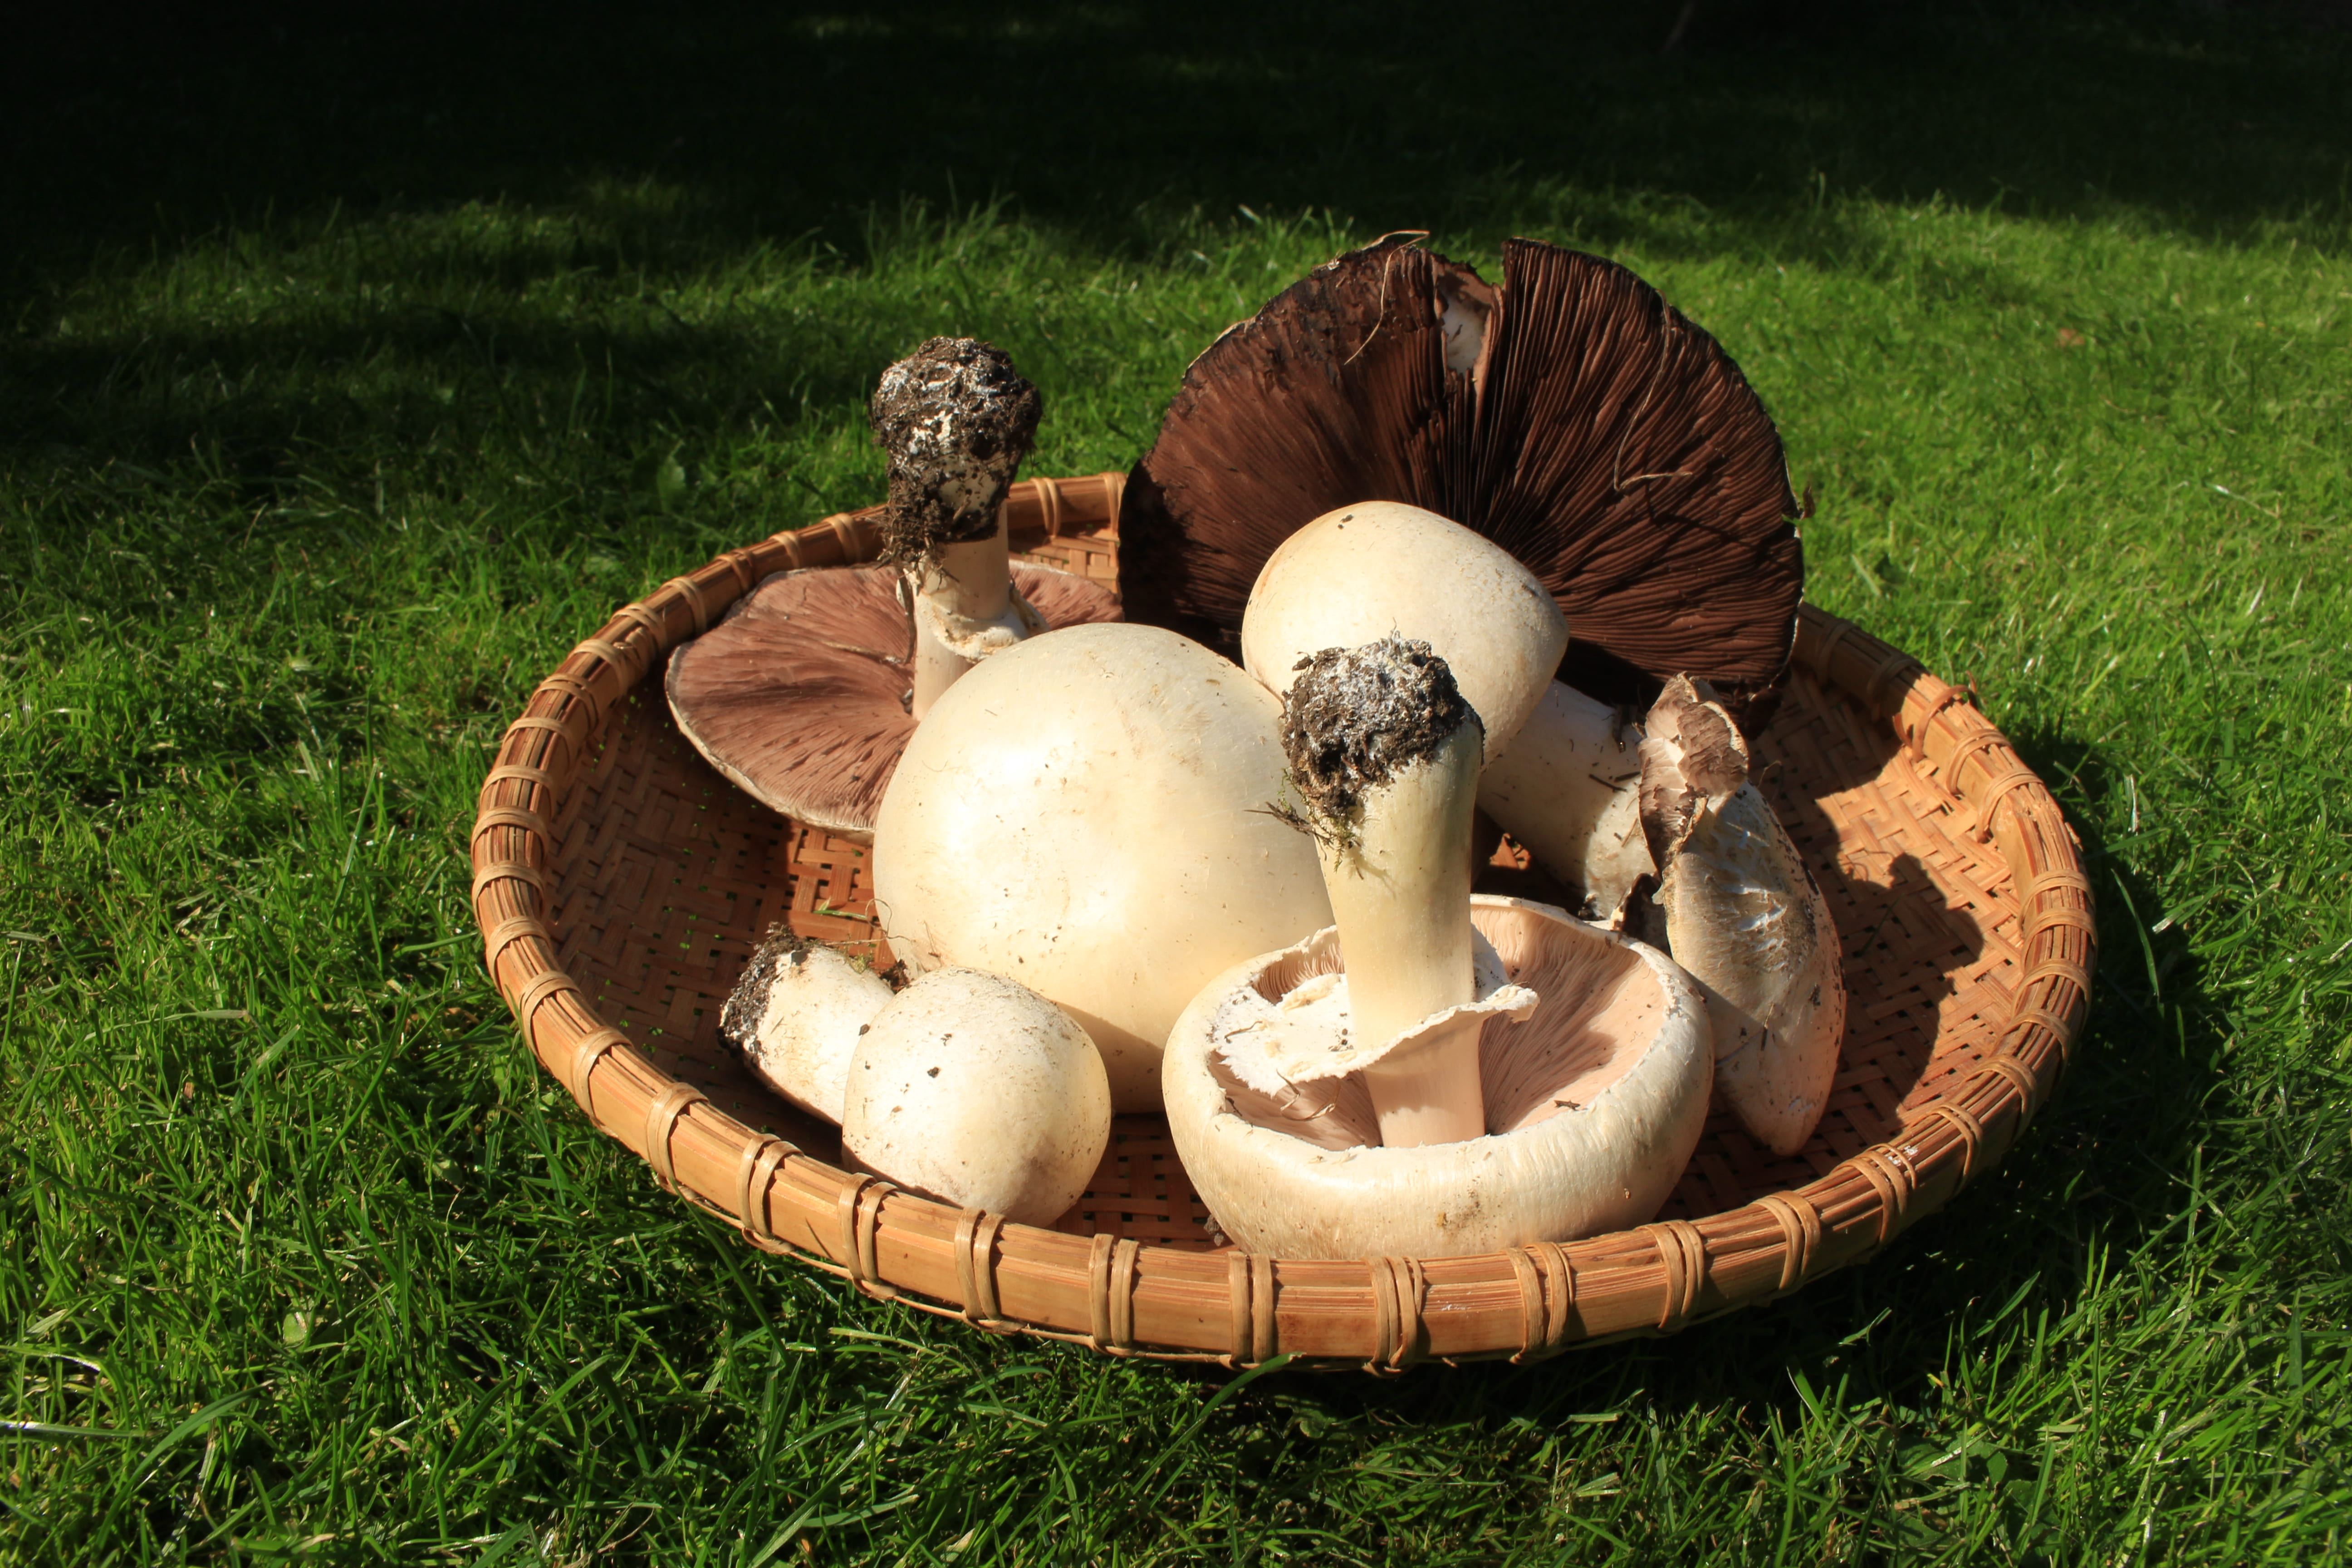 Ready for the weekend., variety of mushrooms on basket, nature